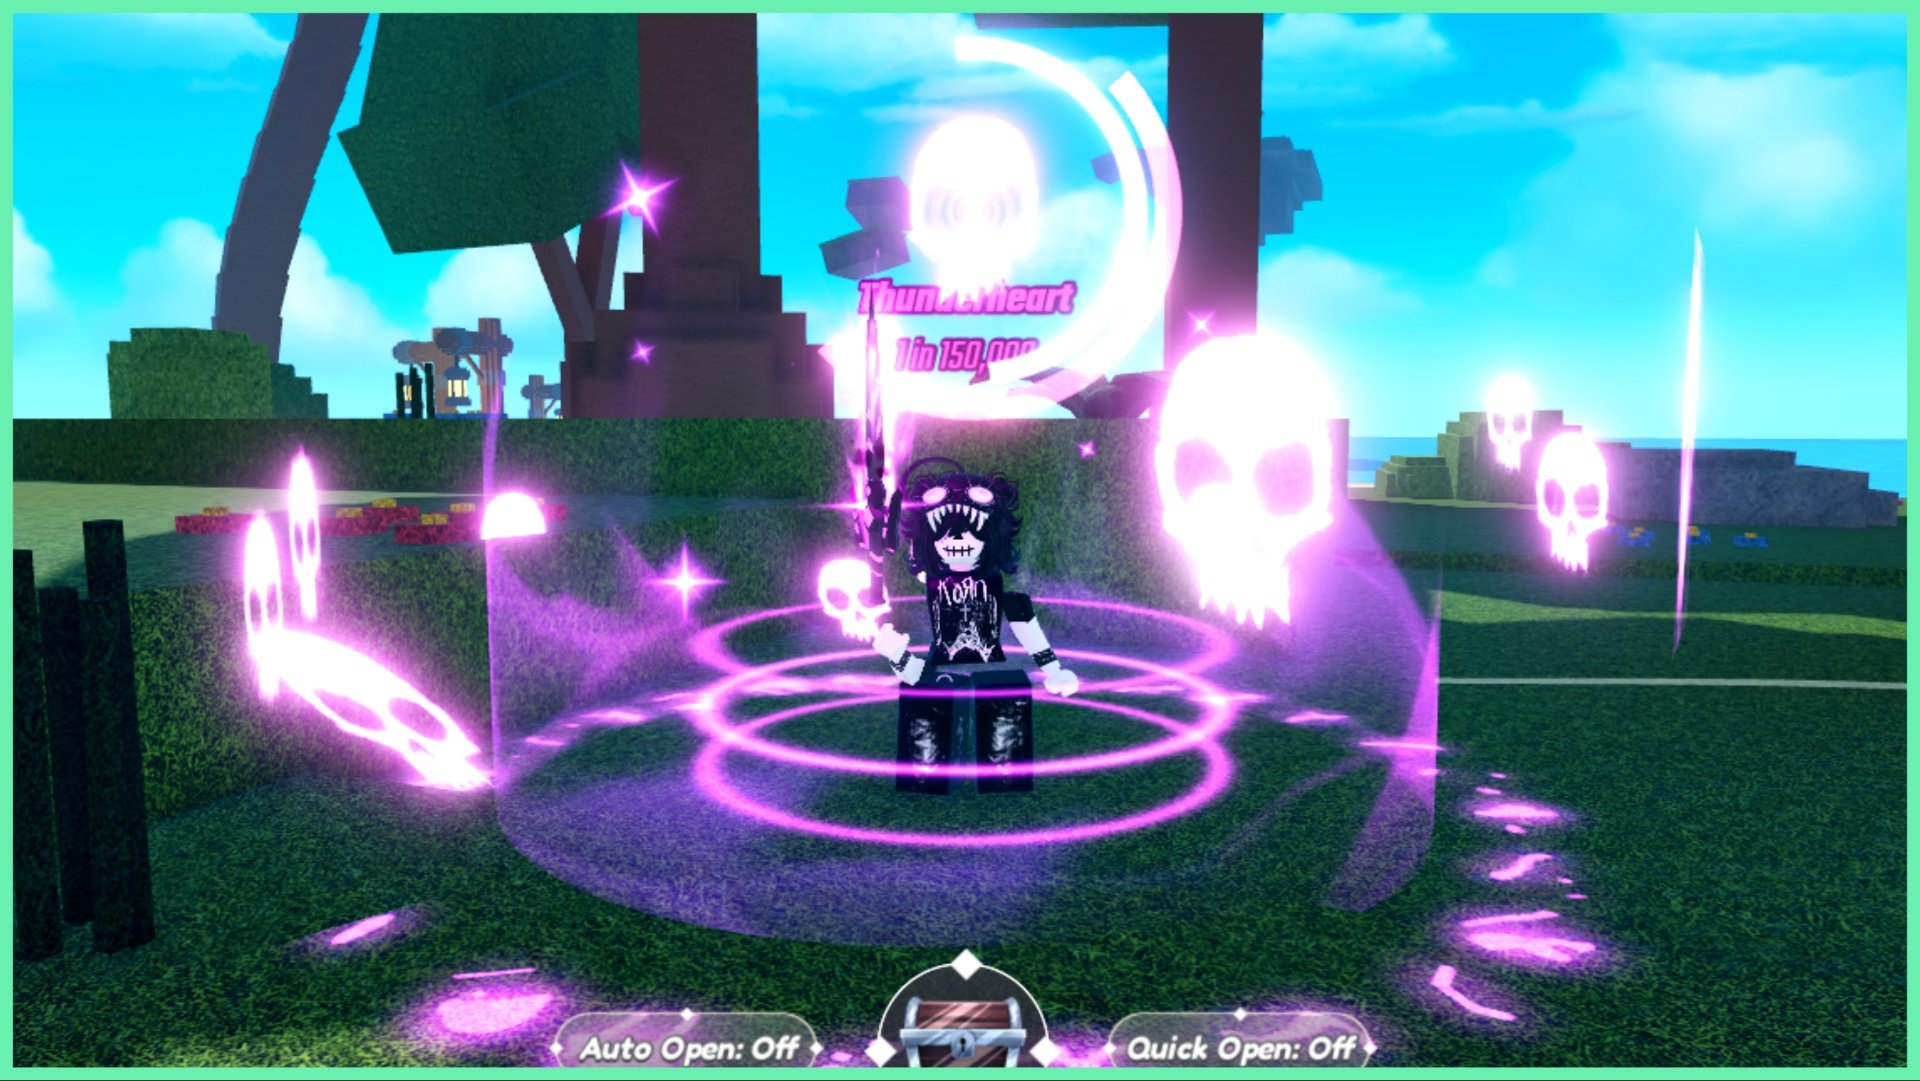 The image shows my avatar during the day wielding a black and purple weapon which emits a purple glow. An aura surrounds my avatar in an AoE which is multiple purple glowing rings and floating glowing skulls which swirl around the entire aura